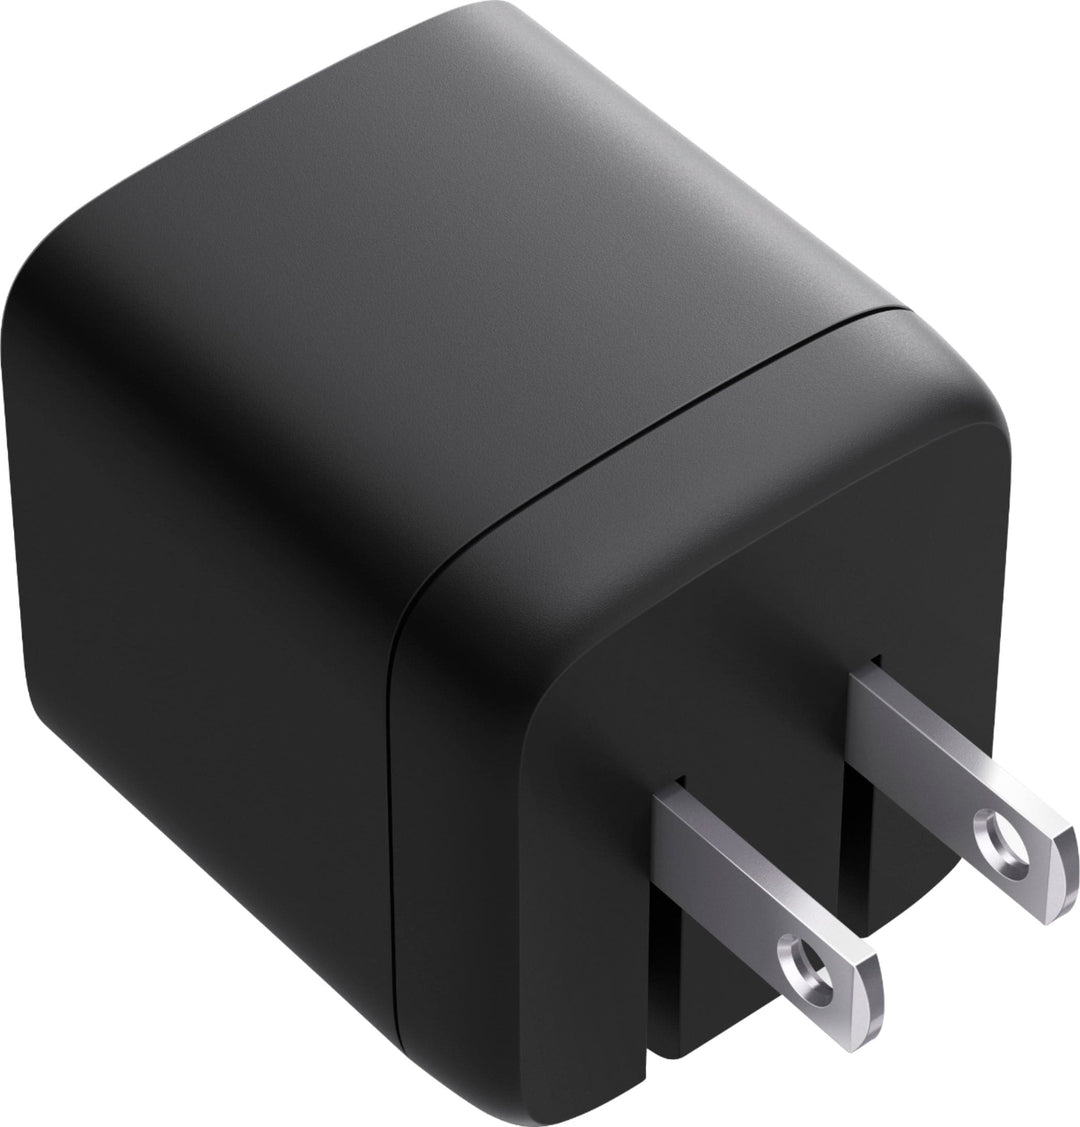 Anker - Nano II 45W PPS USB-C Wall Charger Samsung Galaxy Compatible - Black_2